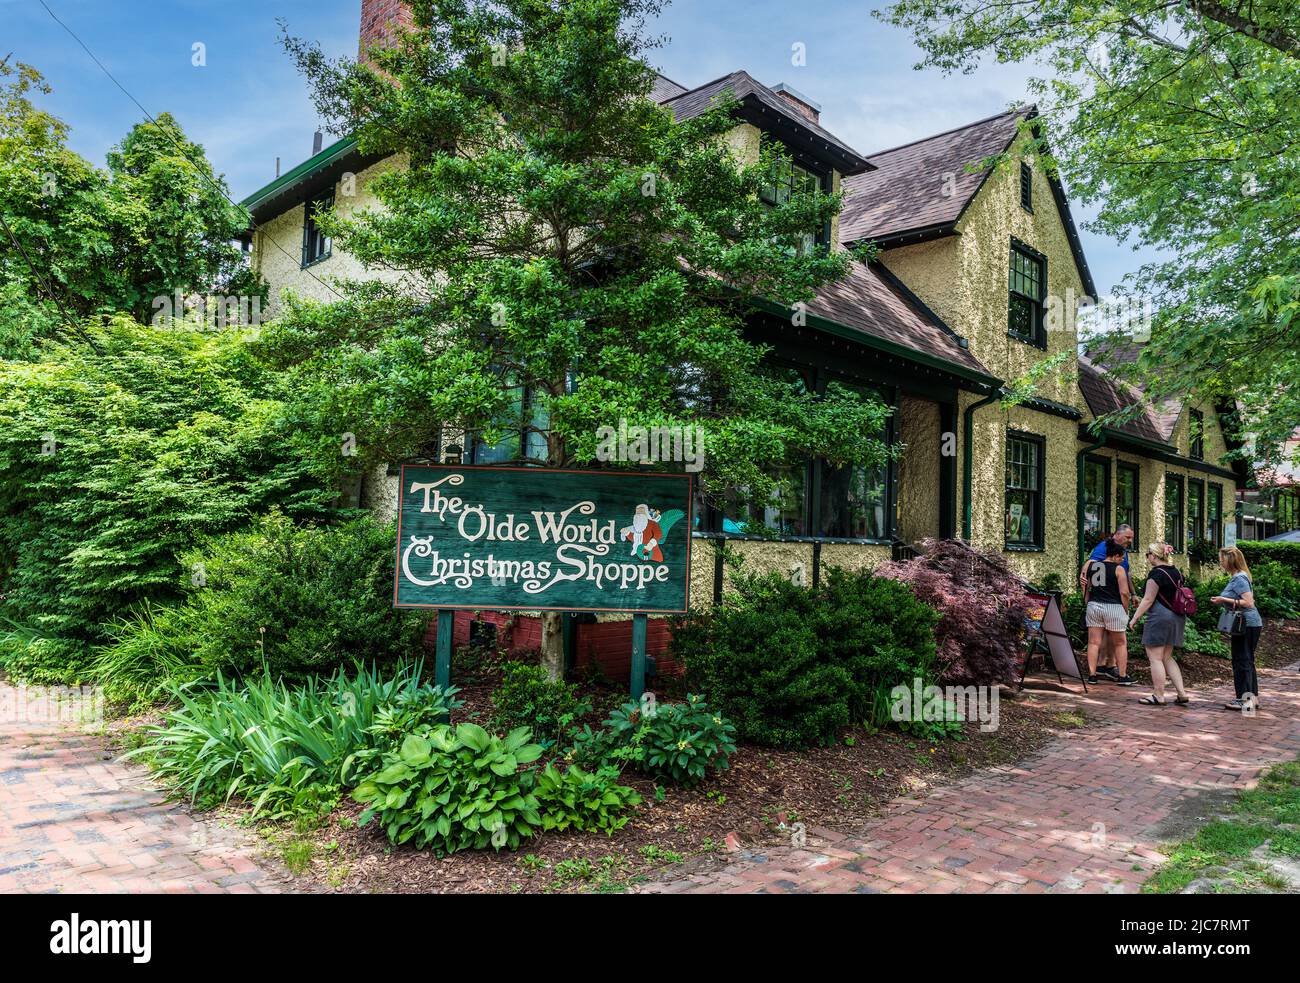 BILTMORE VILLAGE in ASHEVILLE, NC, USA-5 JUNE 2022: The Olde World Christmas Shoppe, building and sign, with 4 people at entrance. Stock Photo